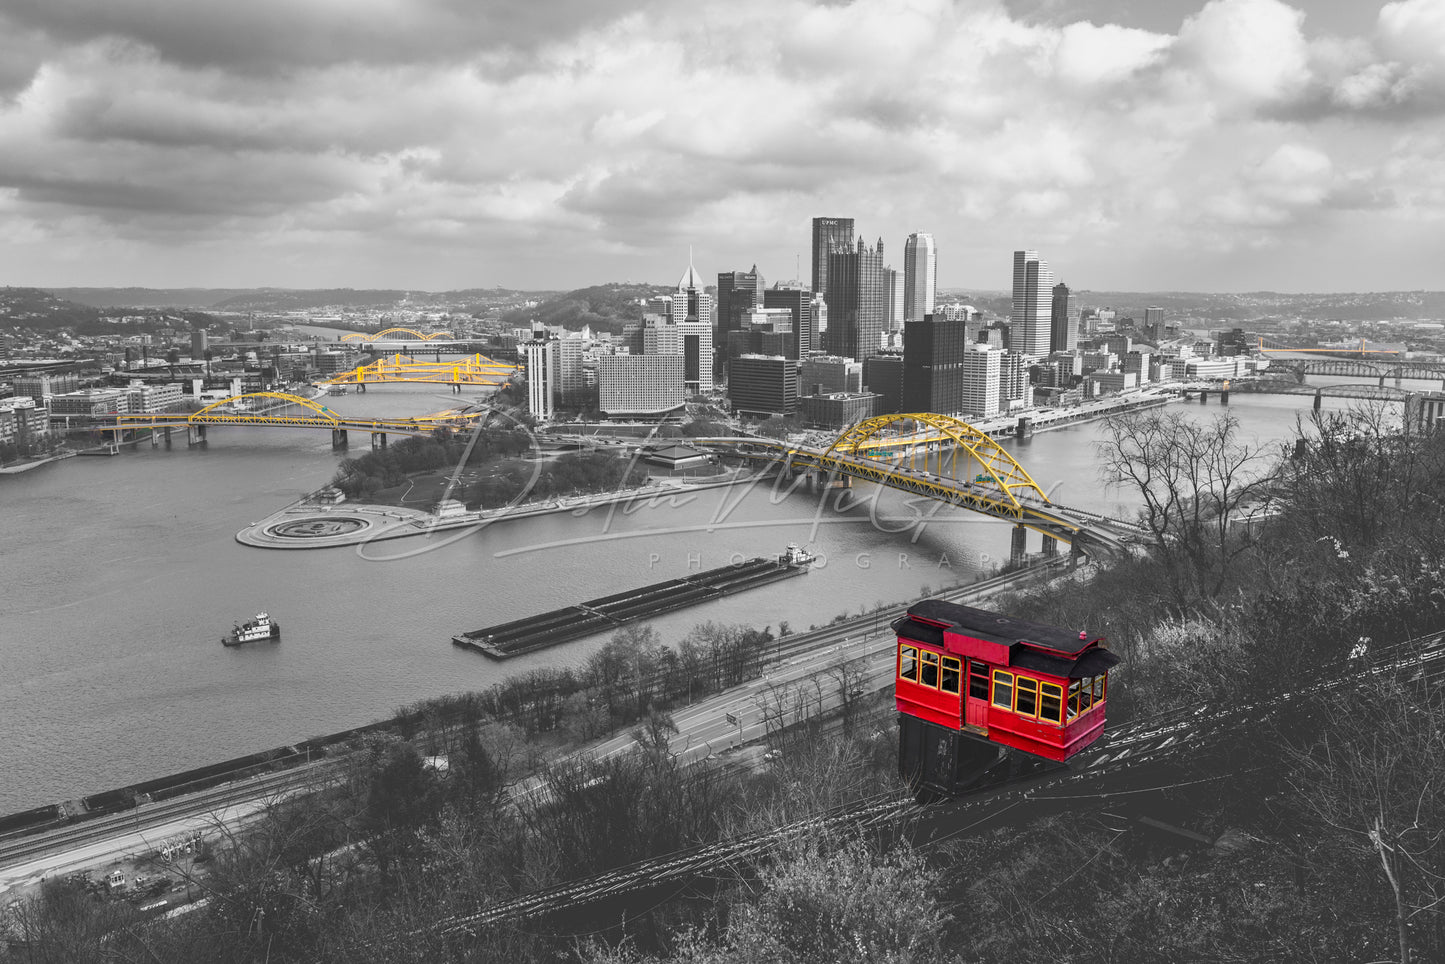 The Duquesne Incline and Pittsburgh Skyline in Selective Color